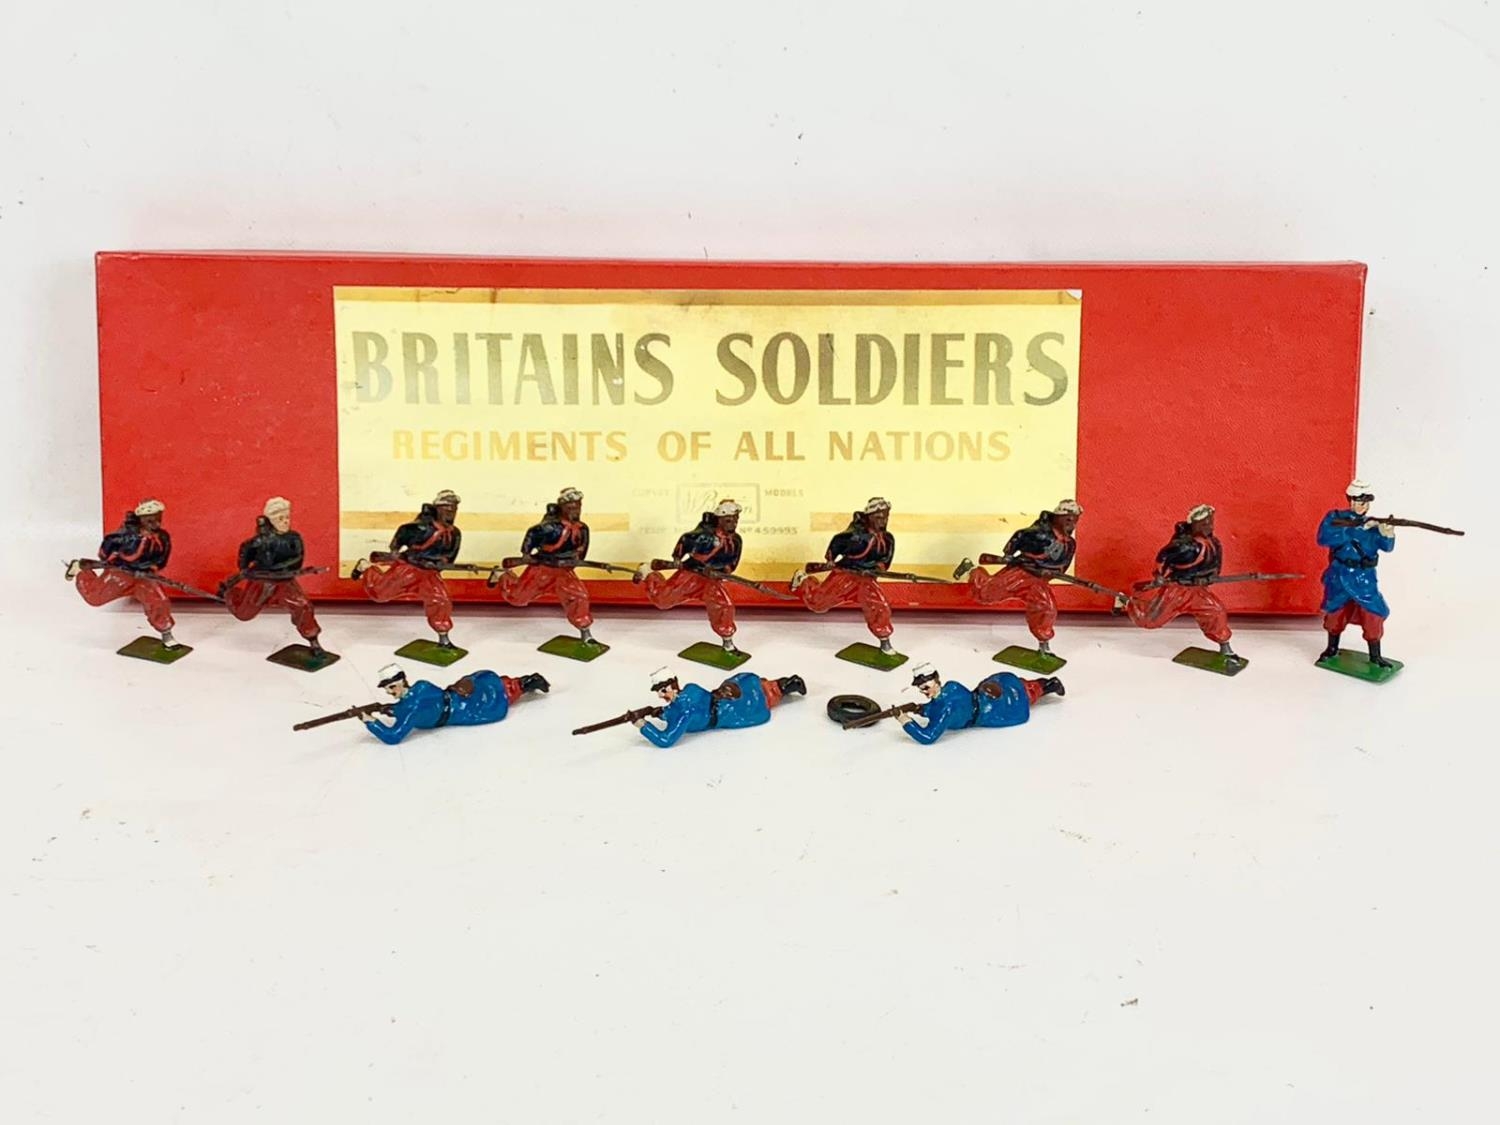 Vintage Britains Soldiers Regiment Of All Nations led model soldiers in original box. Box measures